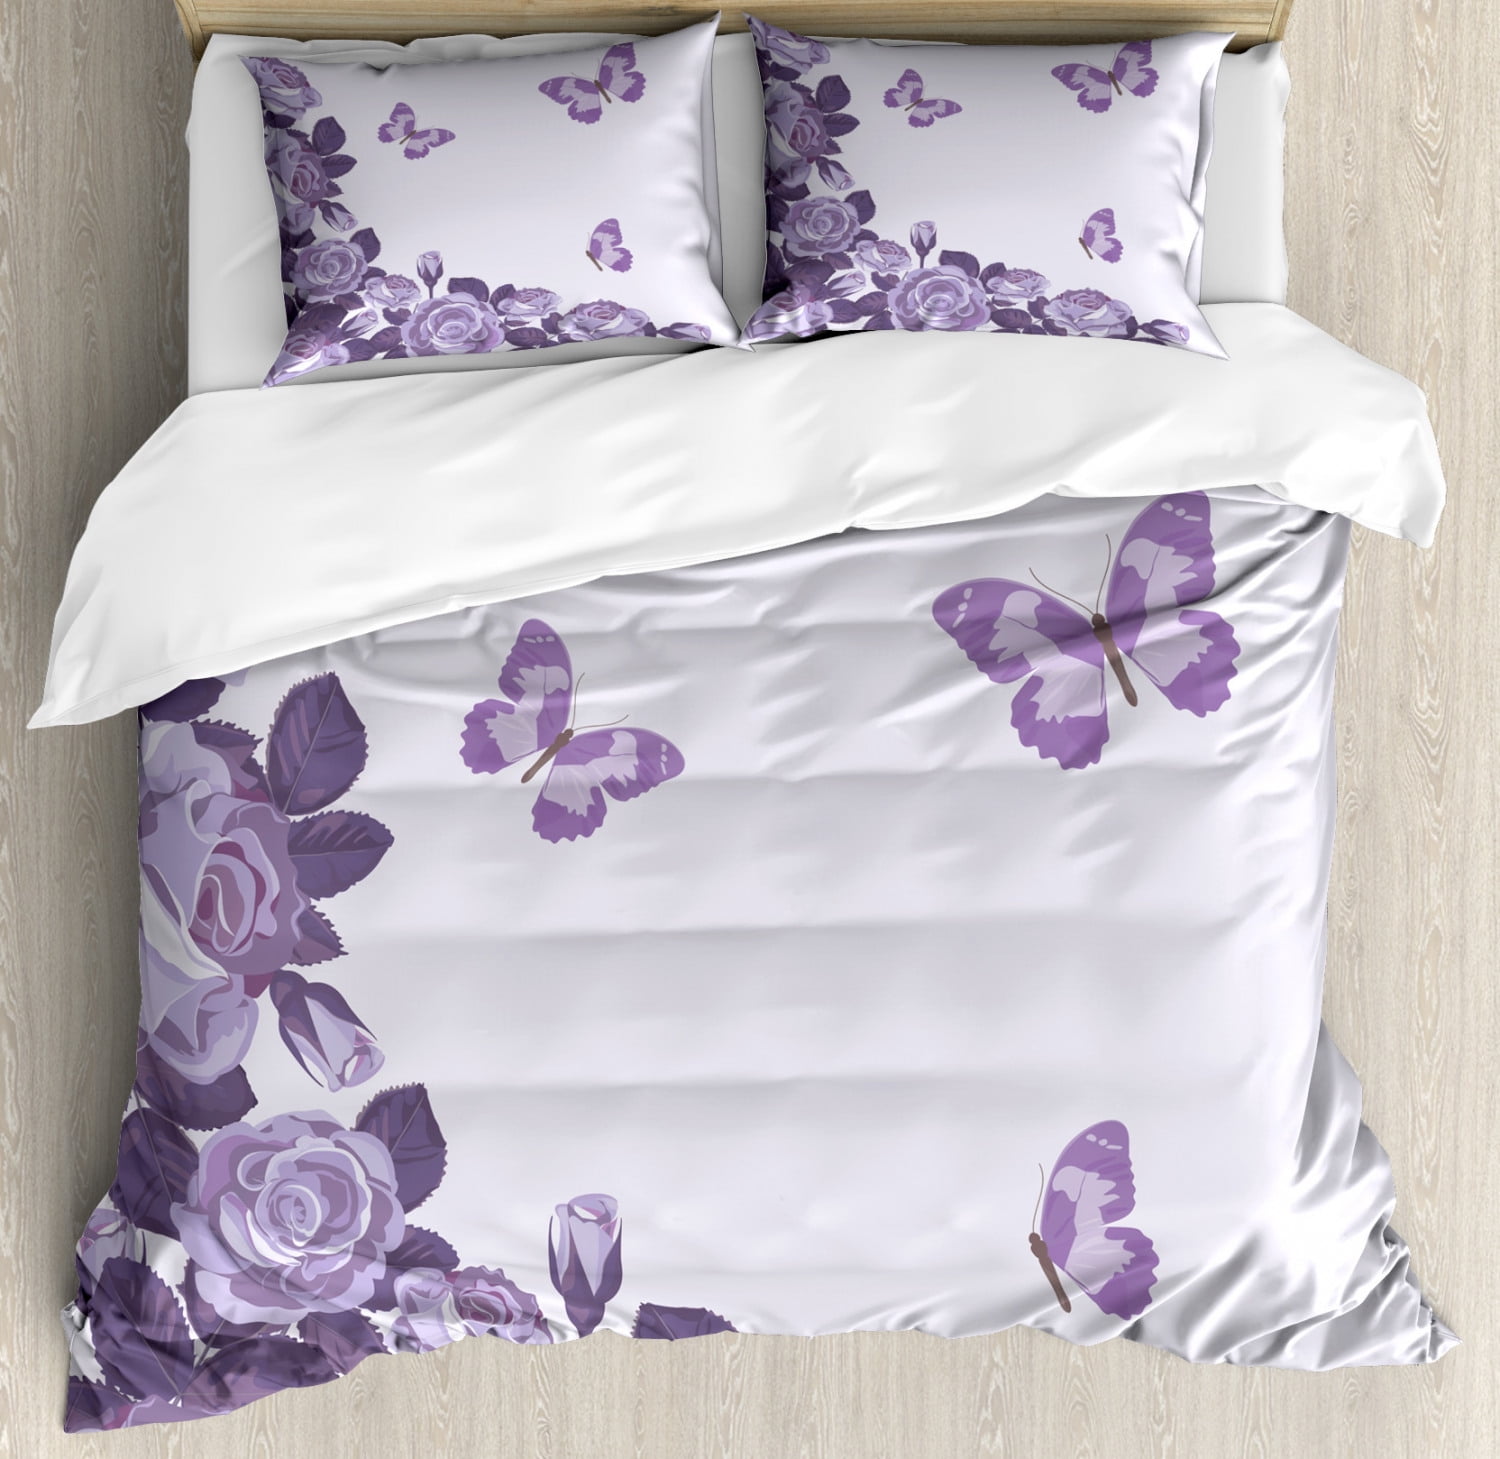 Lilac King Size Duvet Cover Set Bridal Composition With Rose Buds